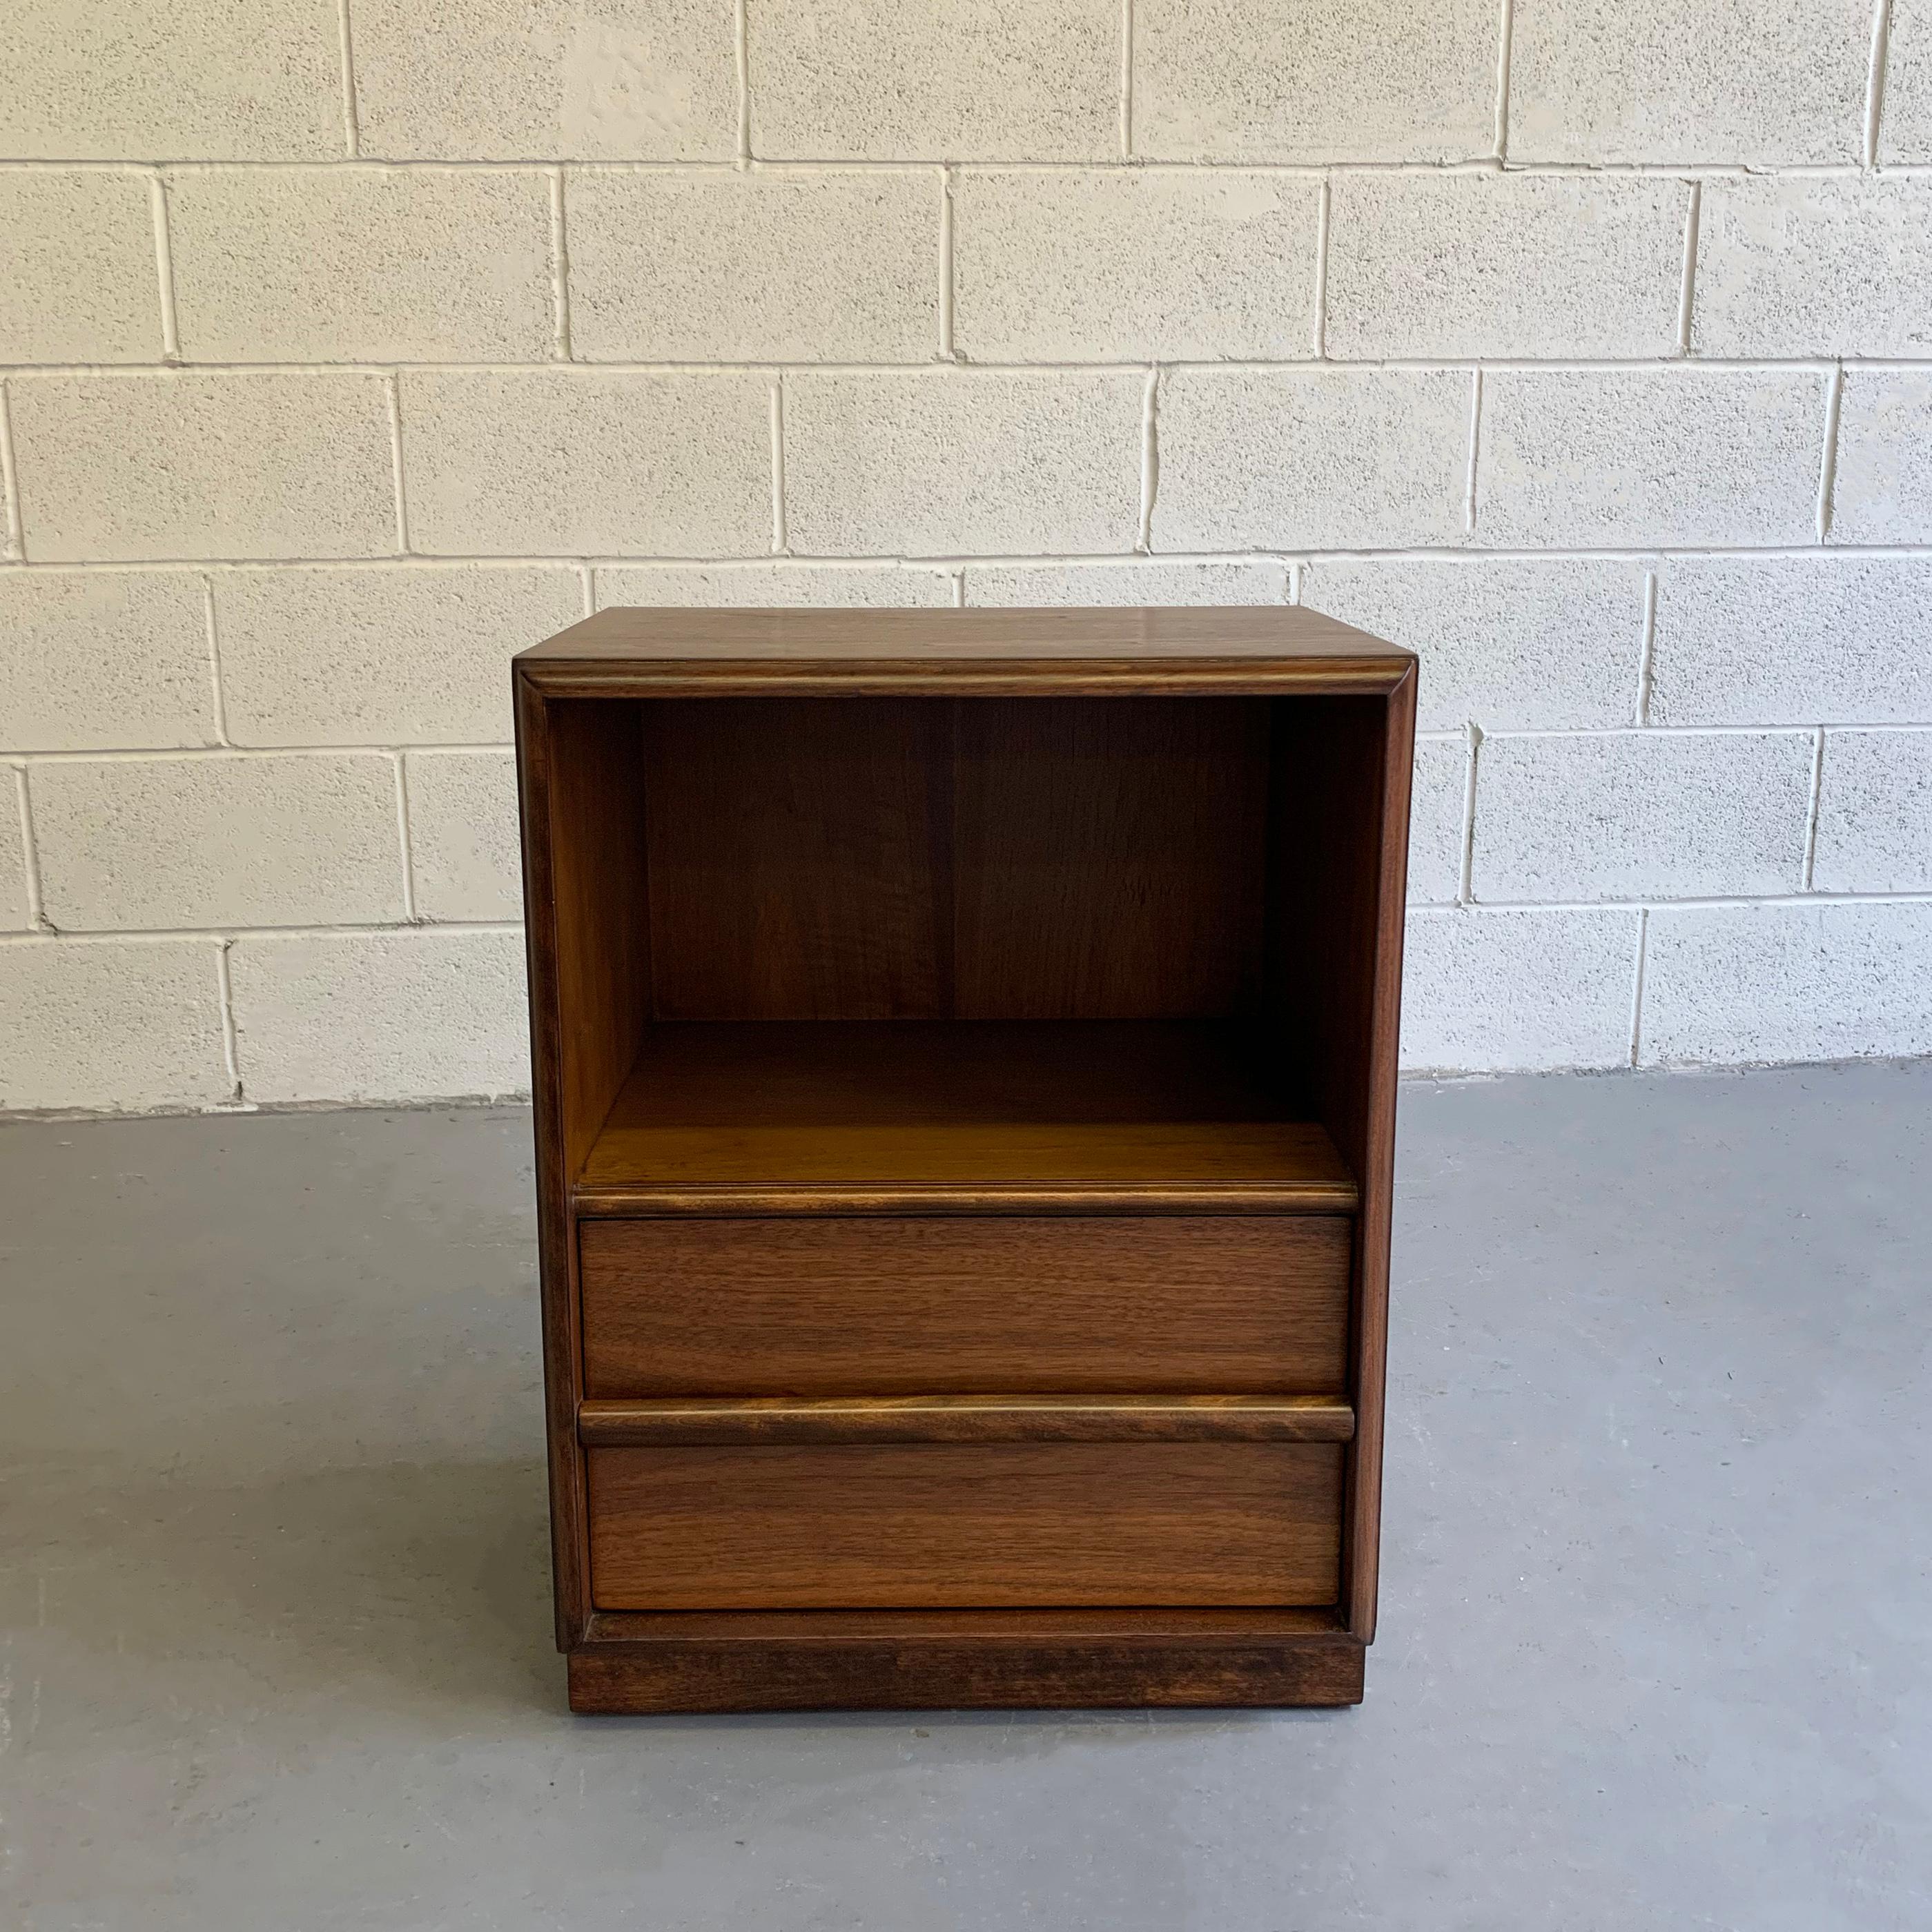 Mid-Century Modern, walnut nightstand or end table by T.H. Robsjohn Gibbings For Widdicomb features an 11 inch height opening and 9.5 inch height drawer.